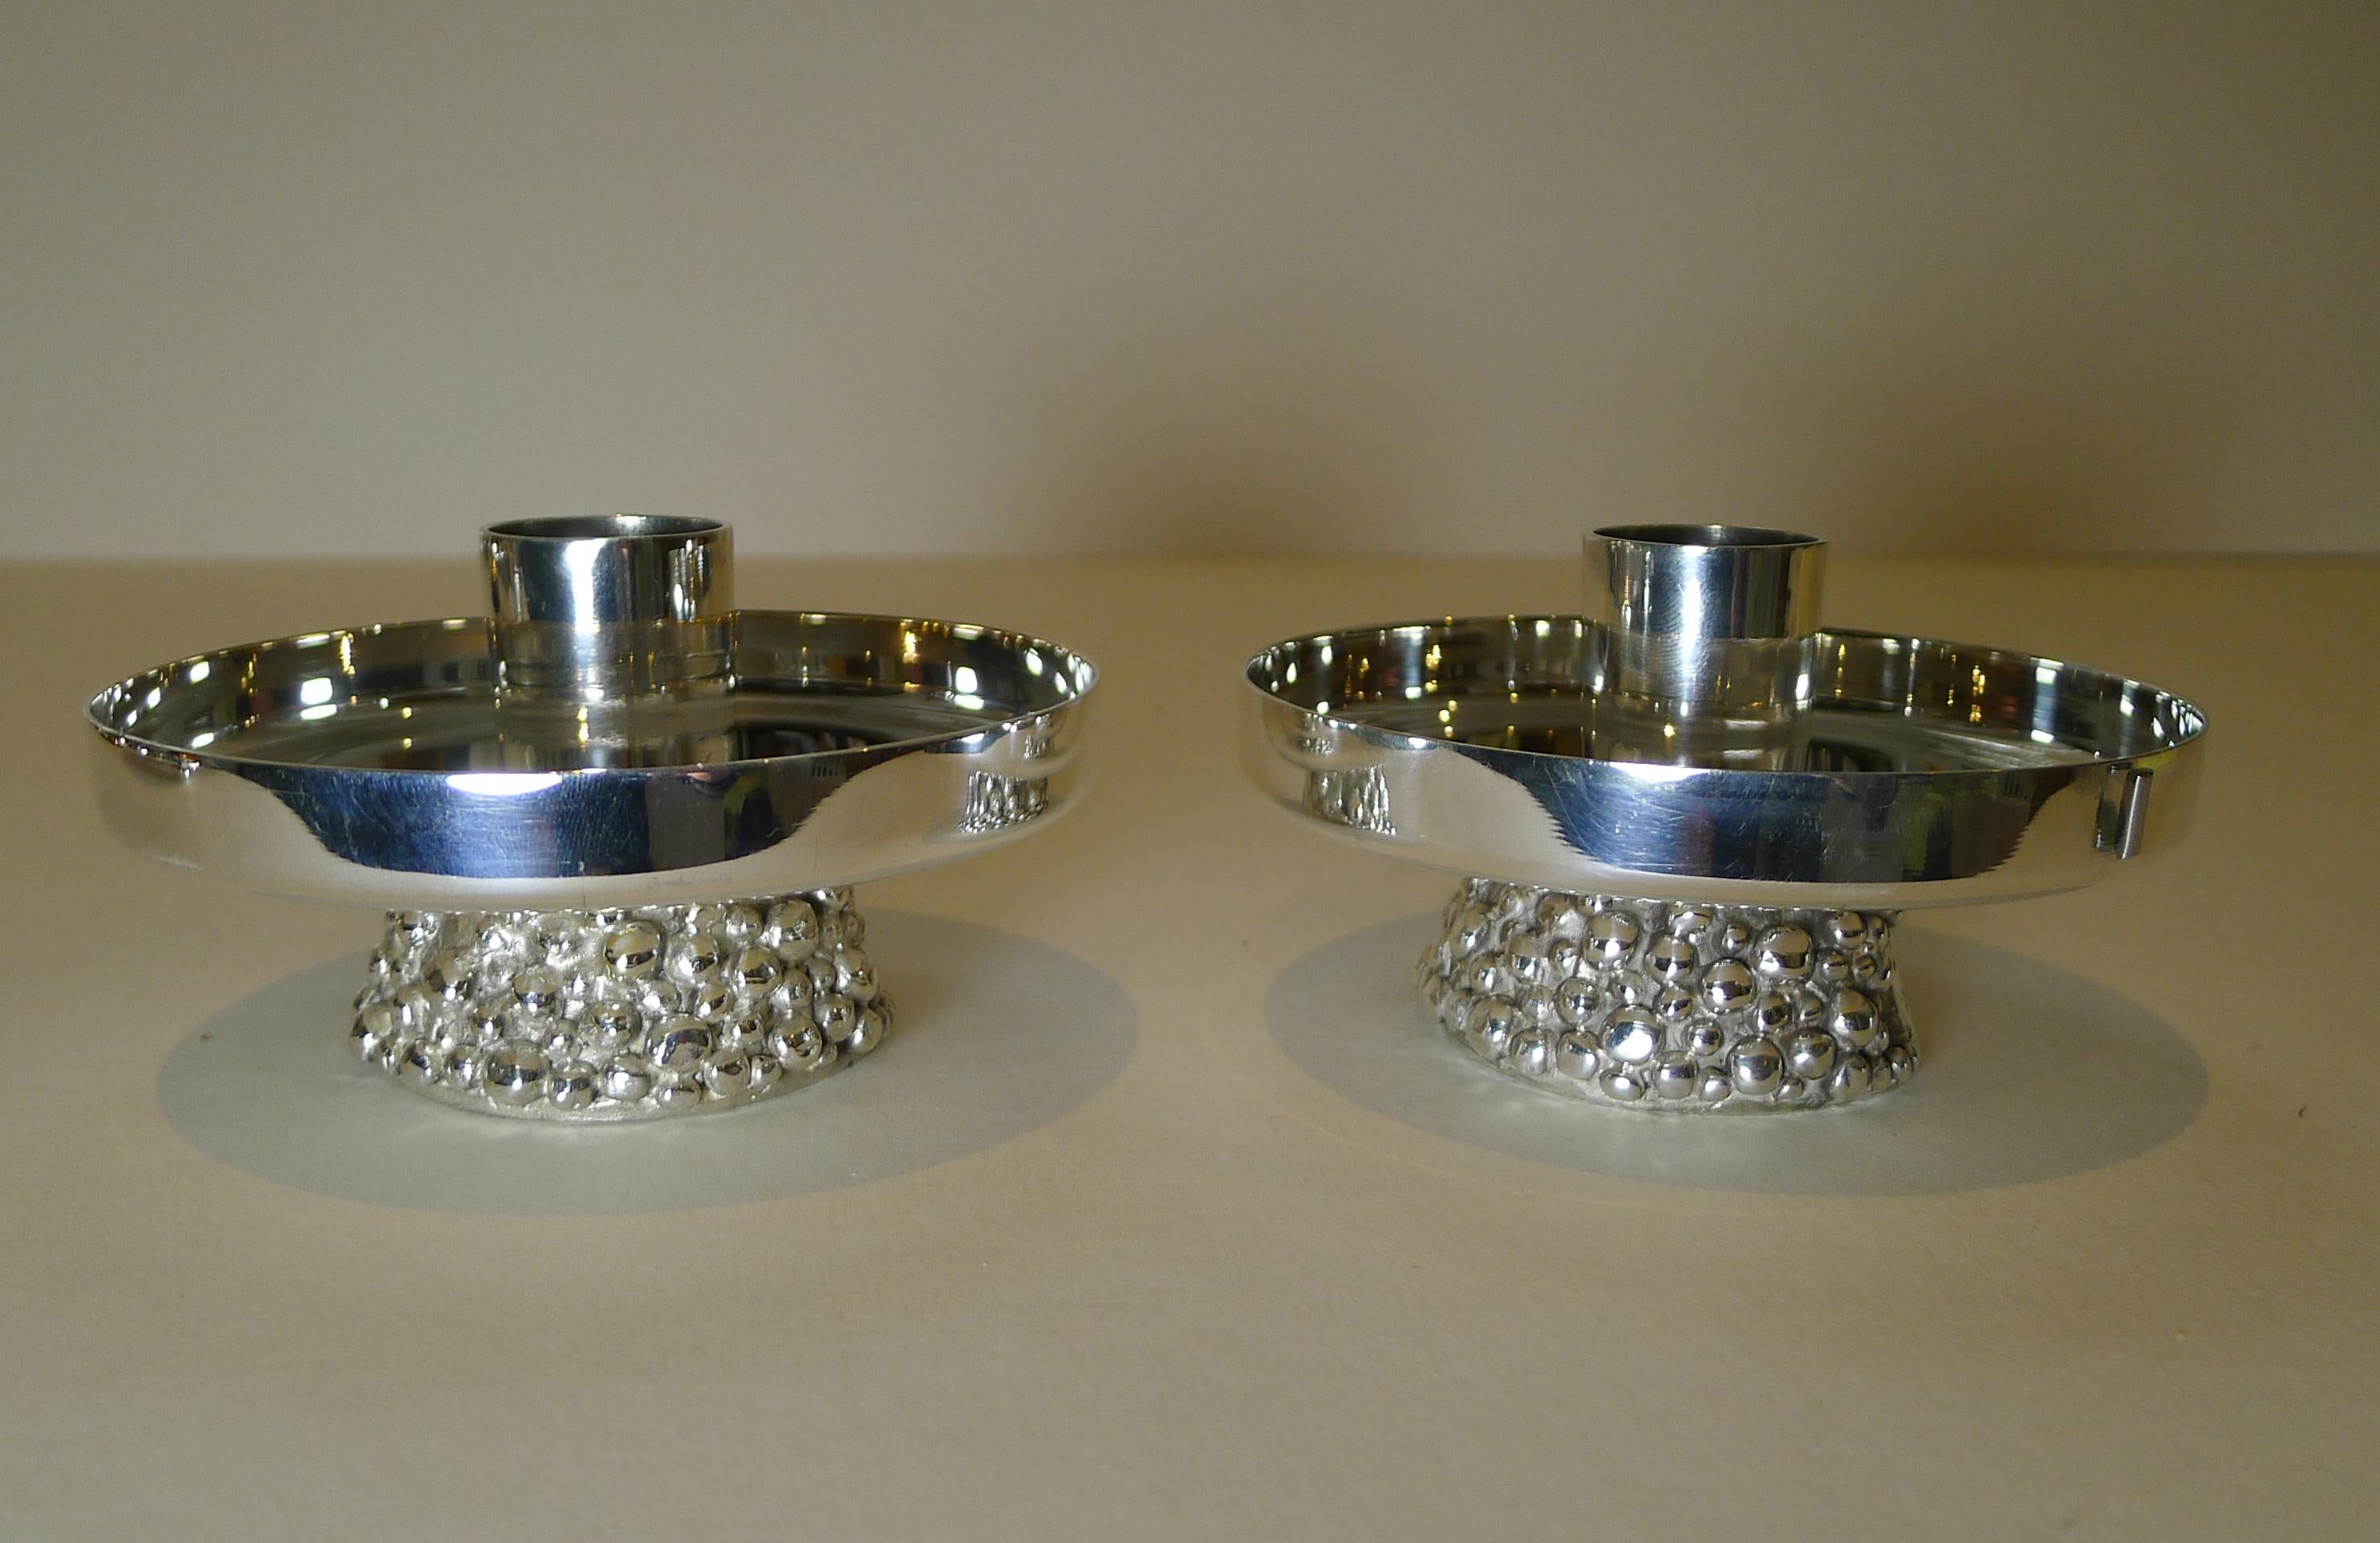 Liberty & Co., Pair Modernist Silver Plated Candlesticks, c. 1950 / 1960 For Sale 3